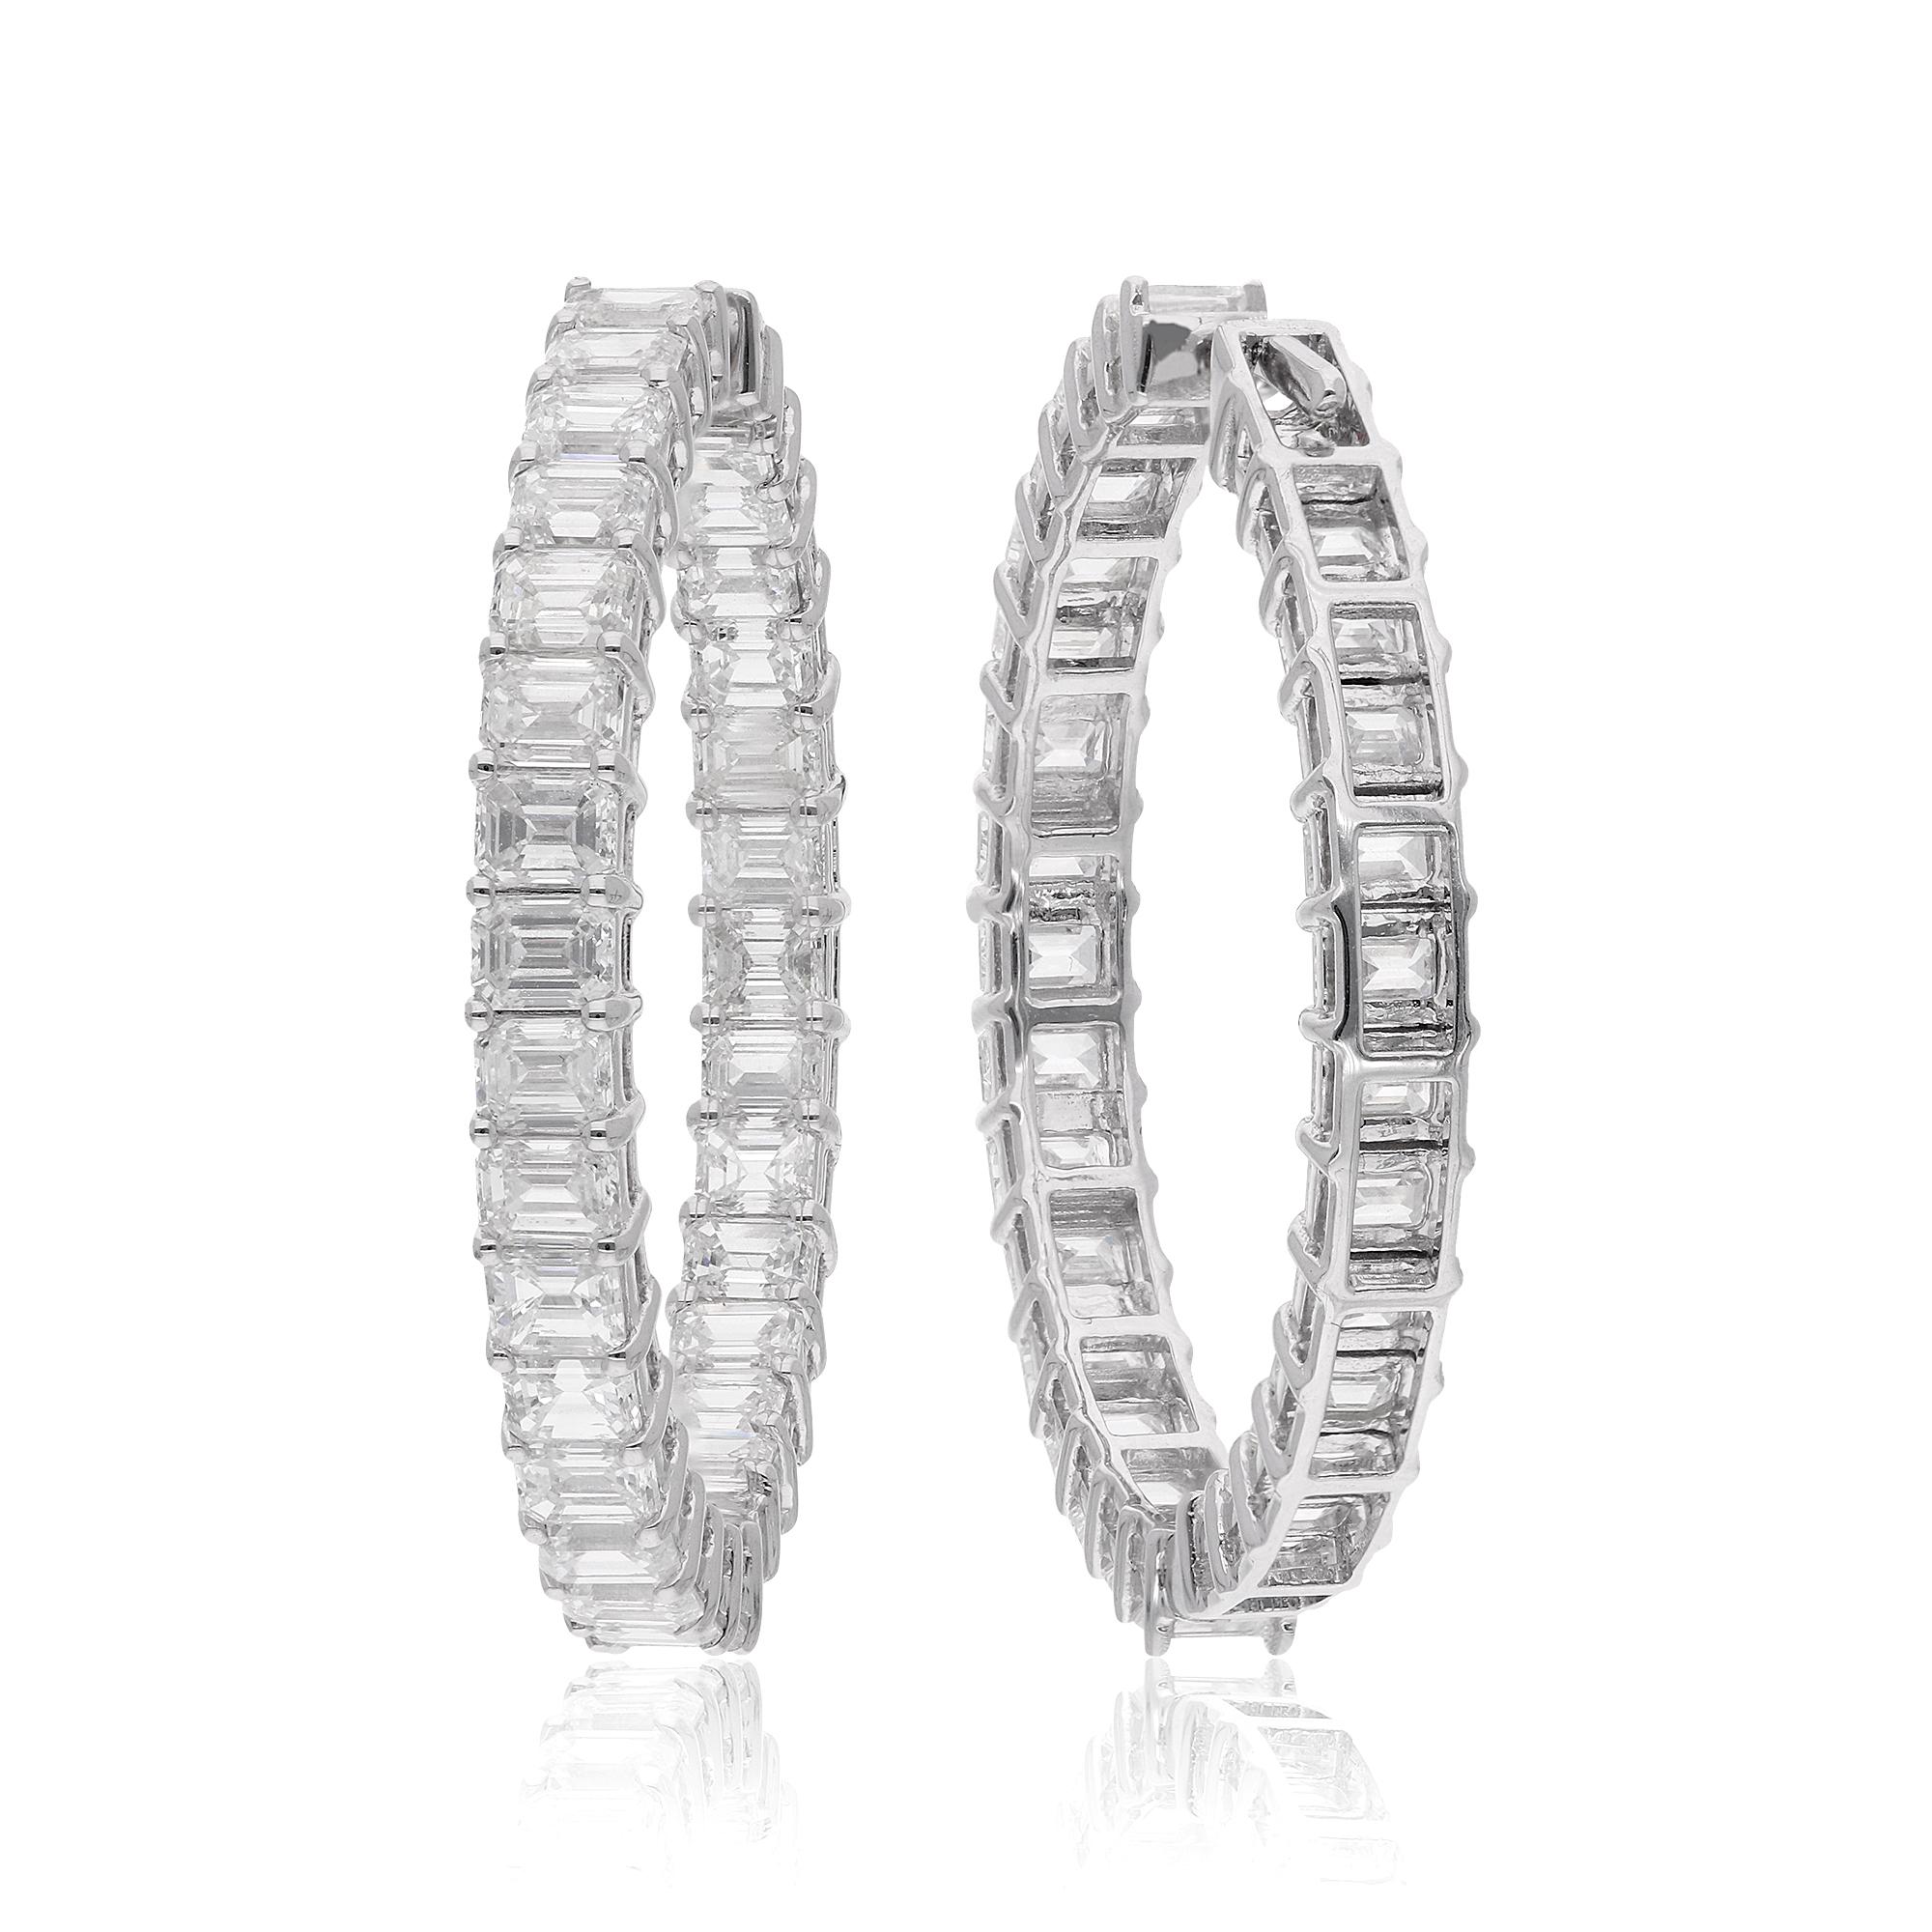 Step into the world of refined elegance with these exquisite 6.62 Ct. Emerald Cut Diamond Hoop Earrings, meticulously crafted in 18 Karat White Gold. Each earring is a masterpiece of artistry and sophistication, handmade with precision to elevate